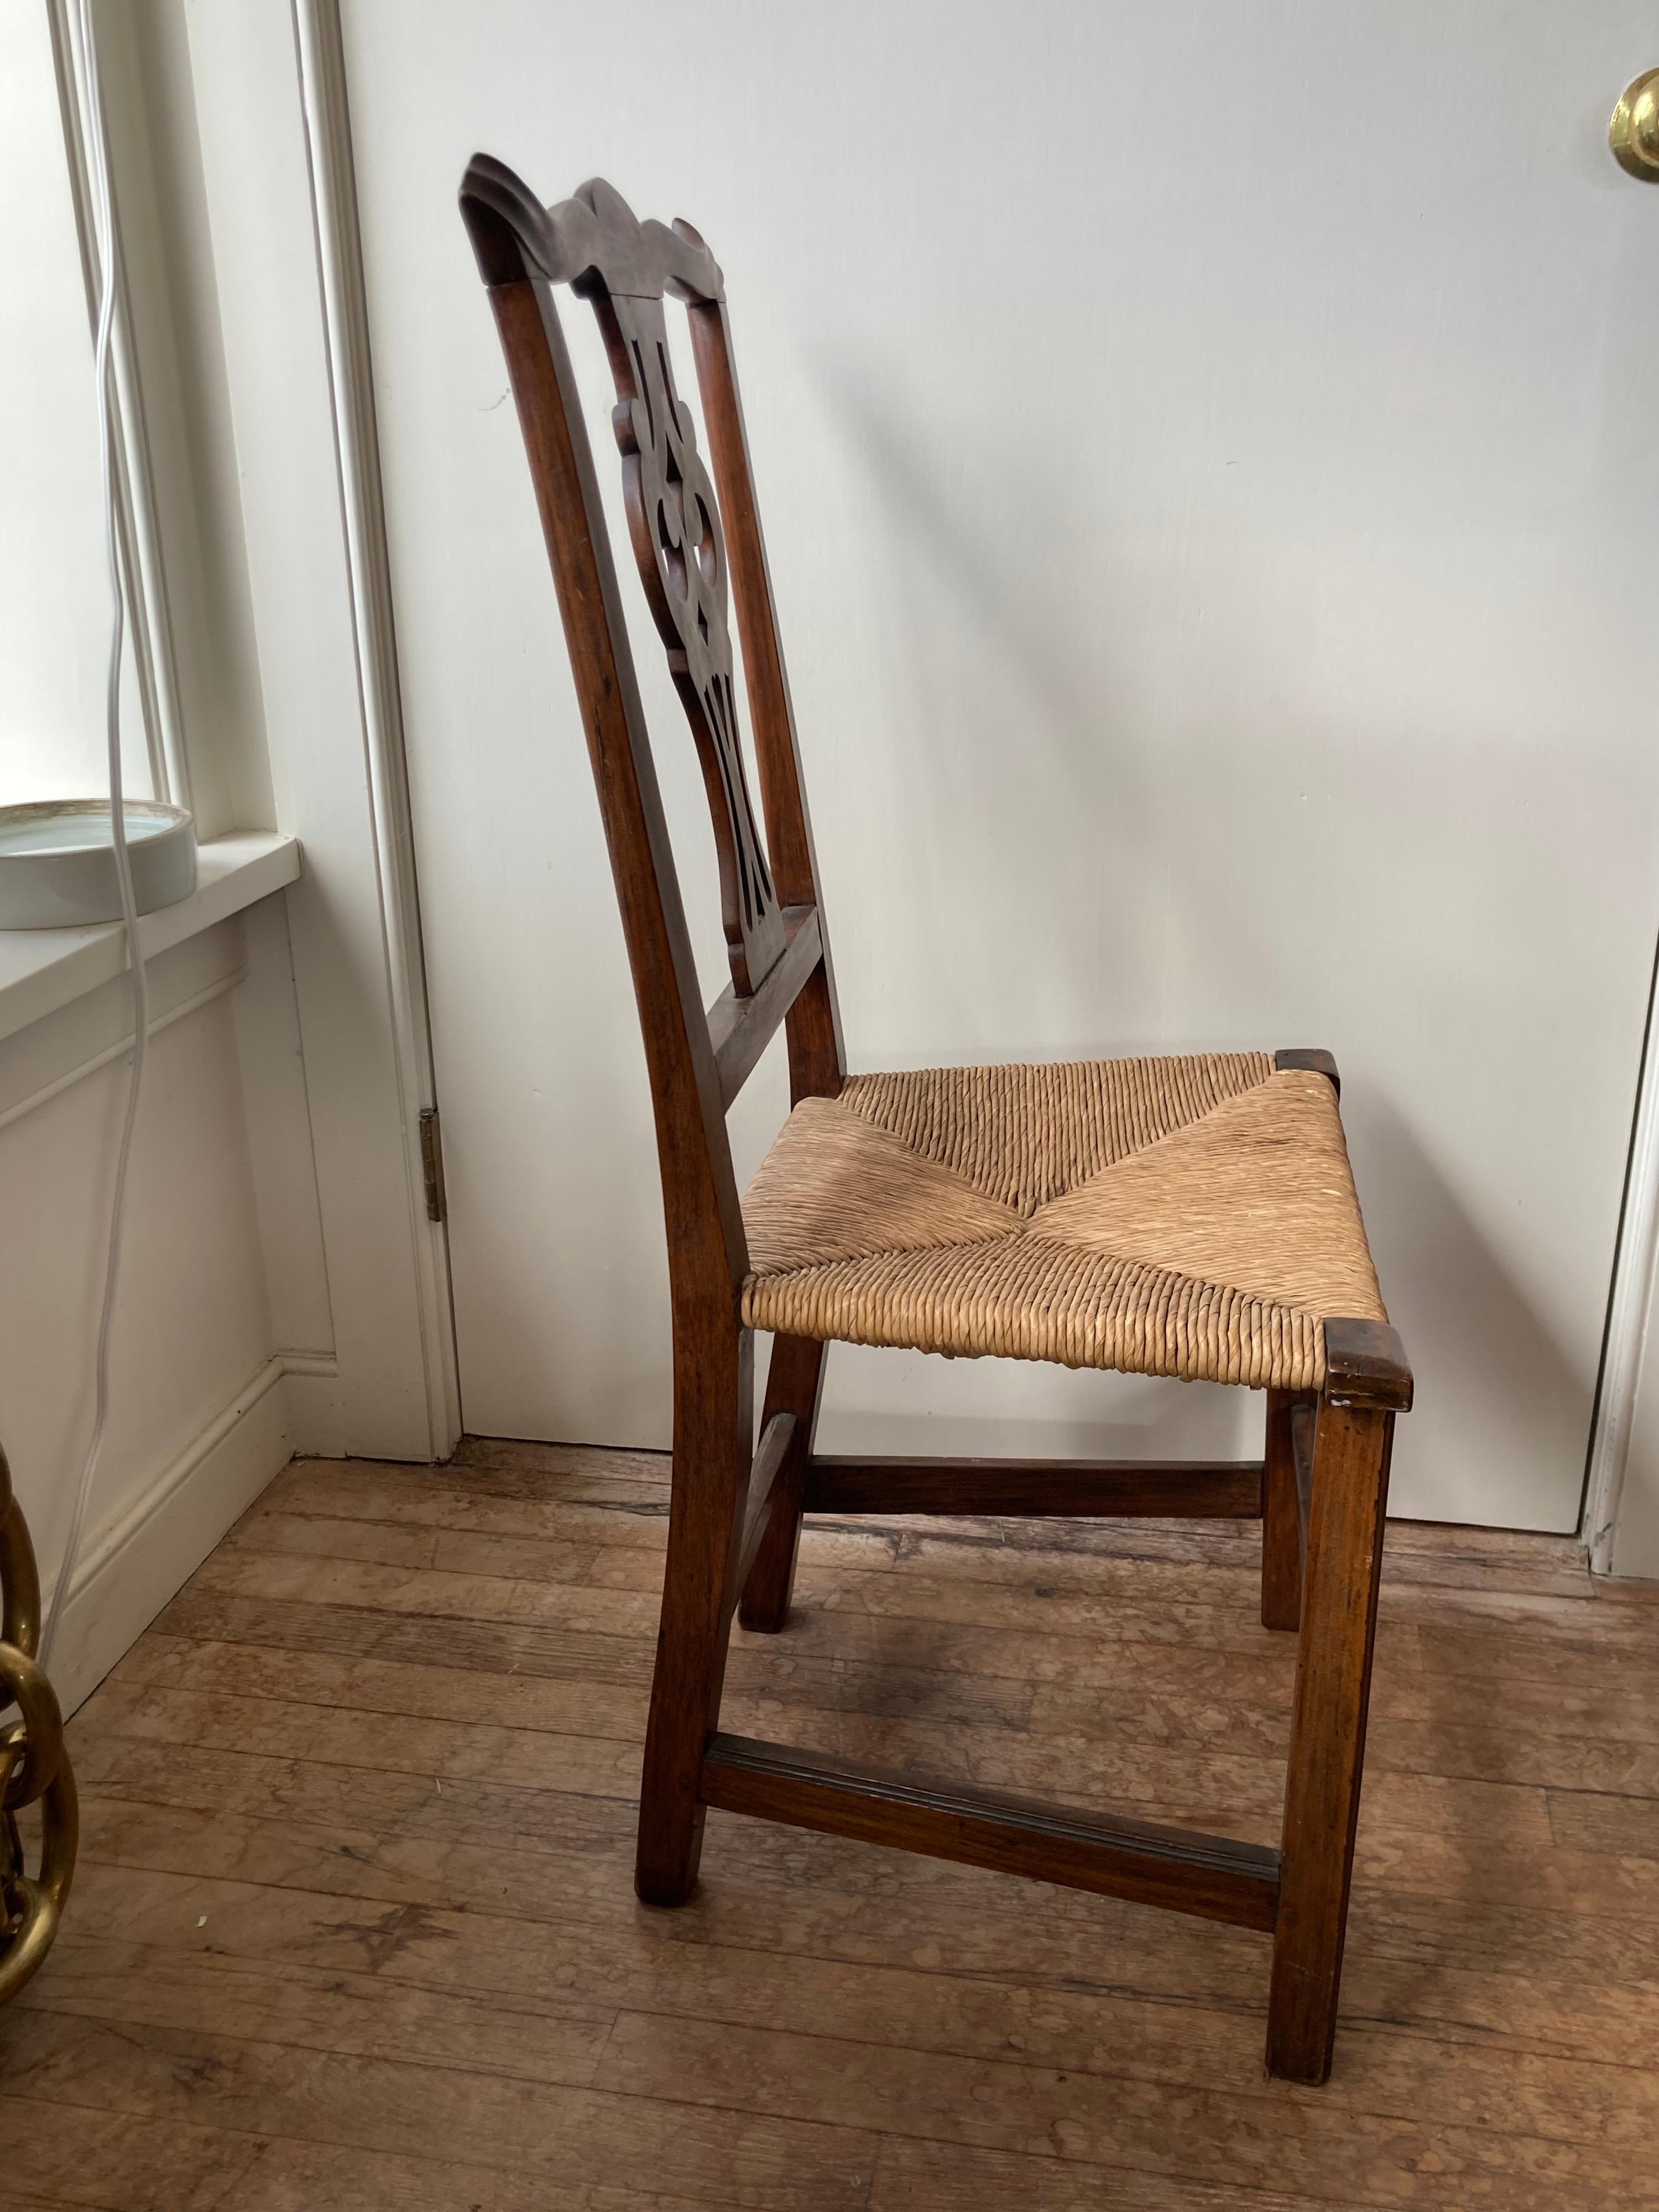 chippendale antique chairs